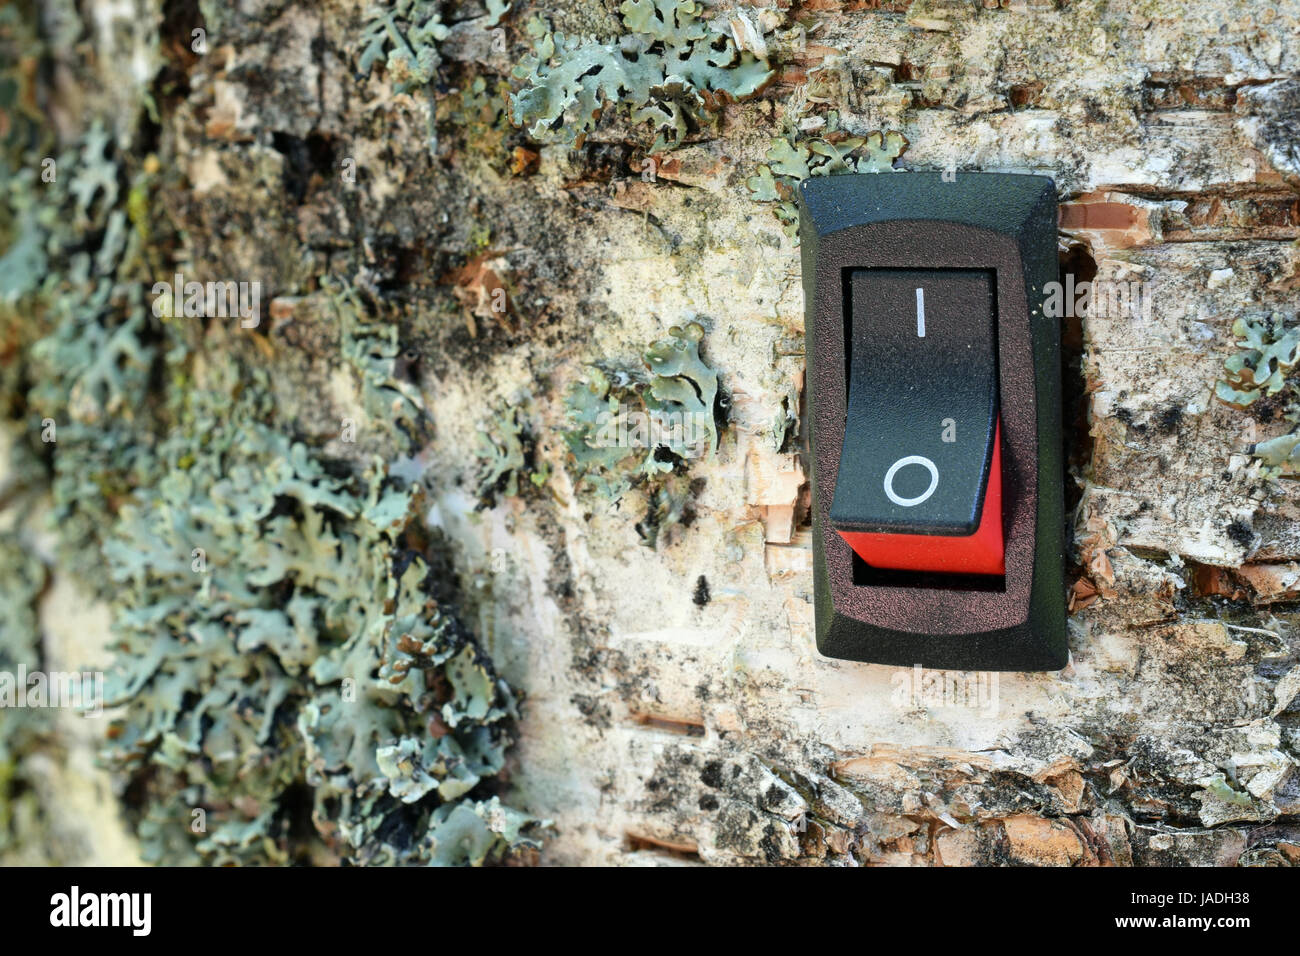 Power switch installed on birch tree. Concept of conservation, green business and alternative energy. Stock Photo